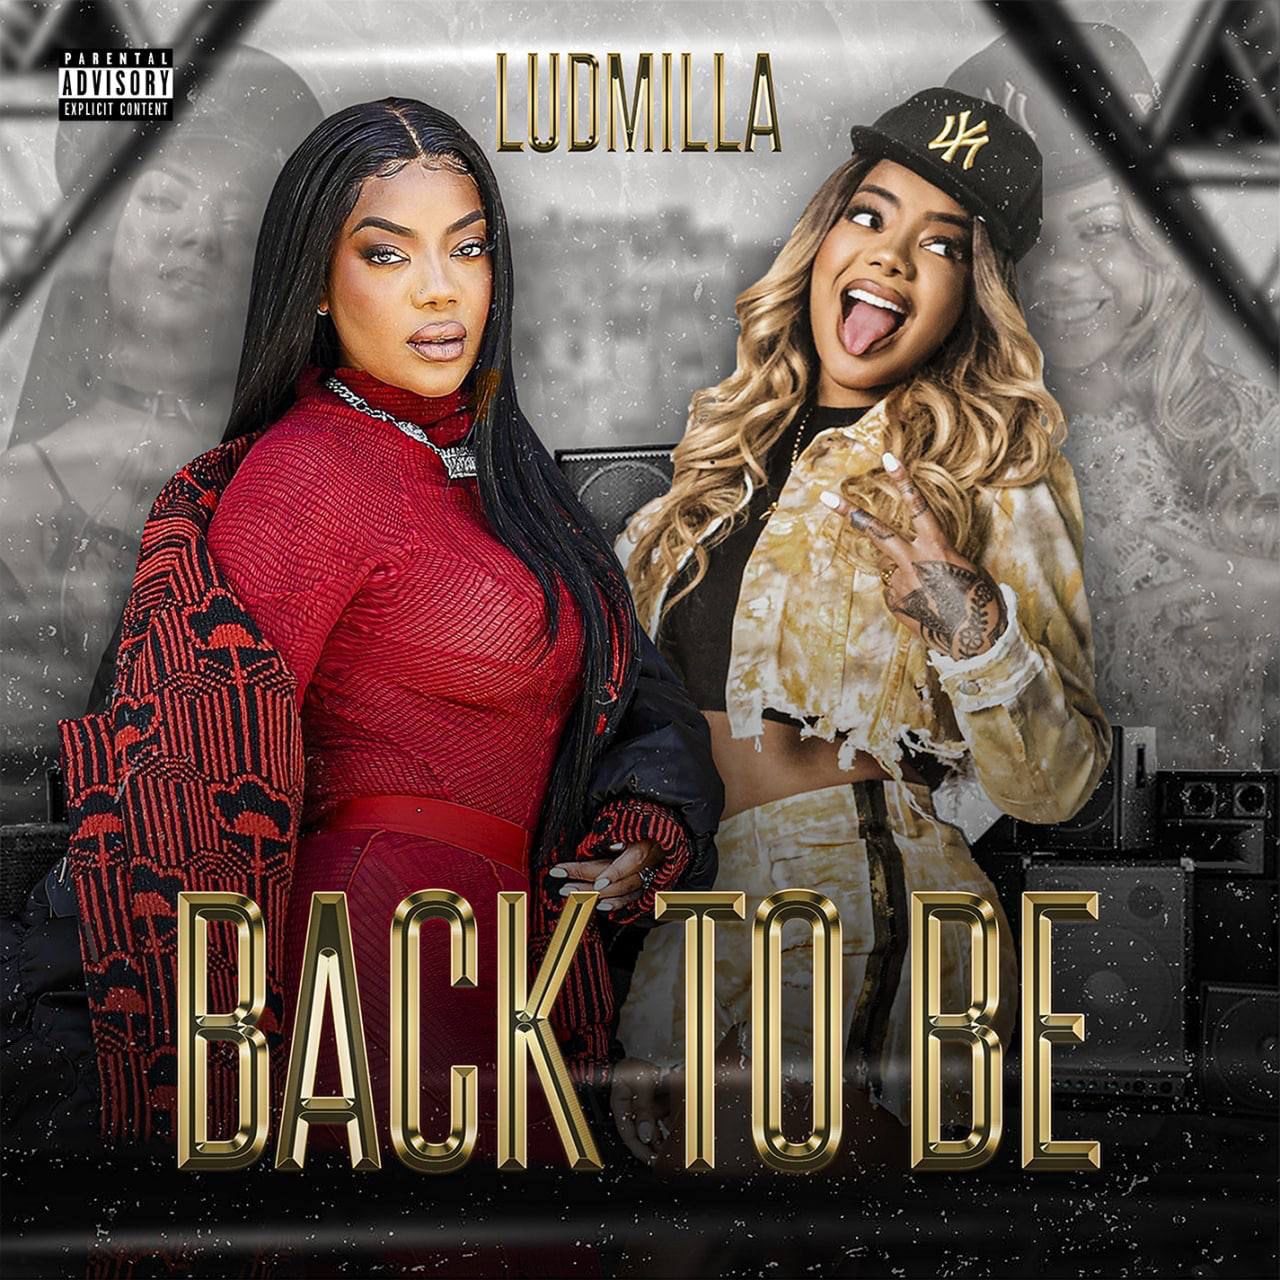 LUDMILLA BACK TO BE cover artwork